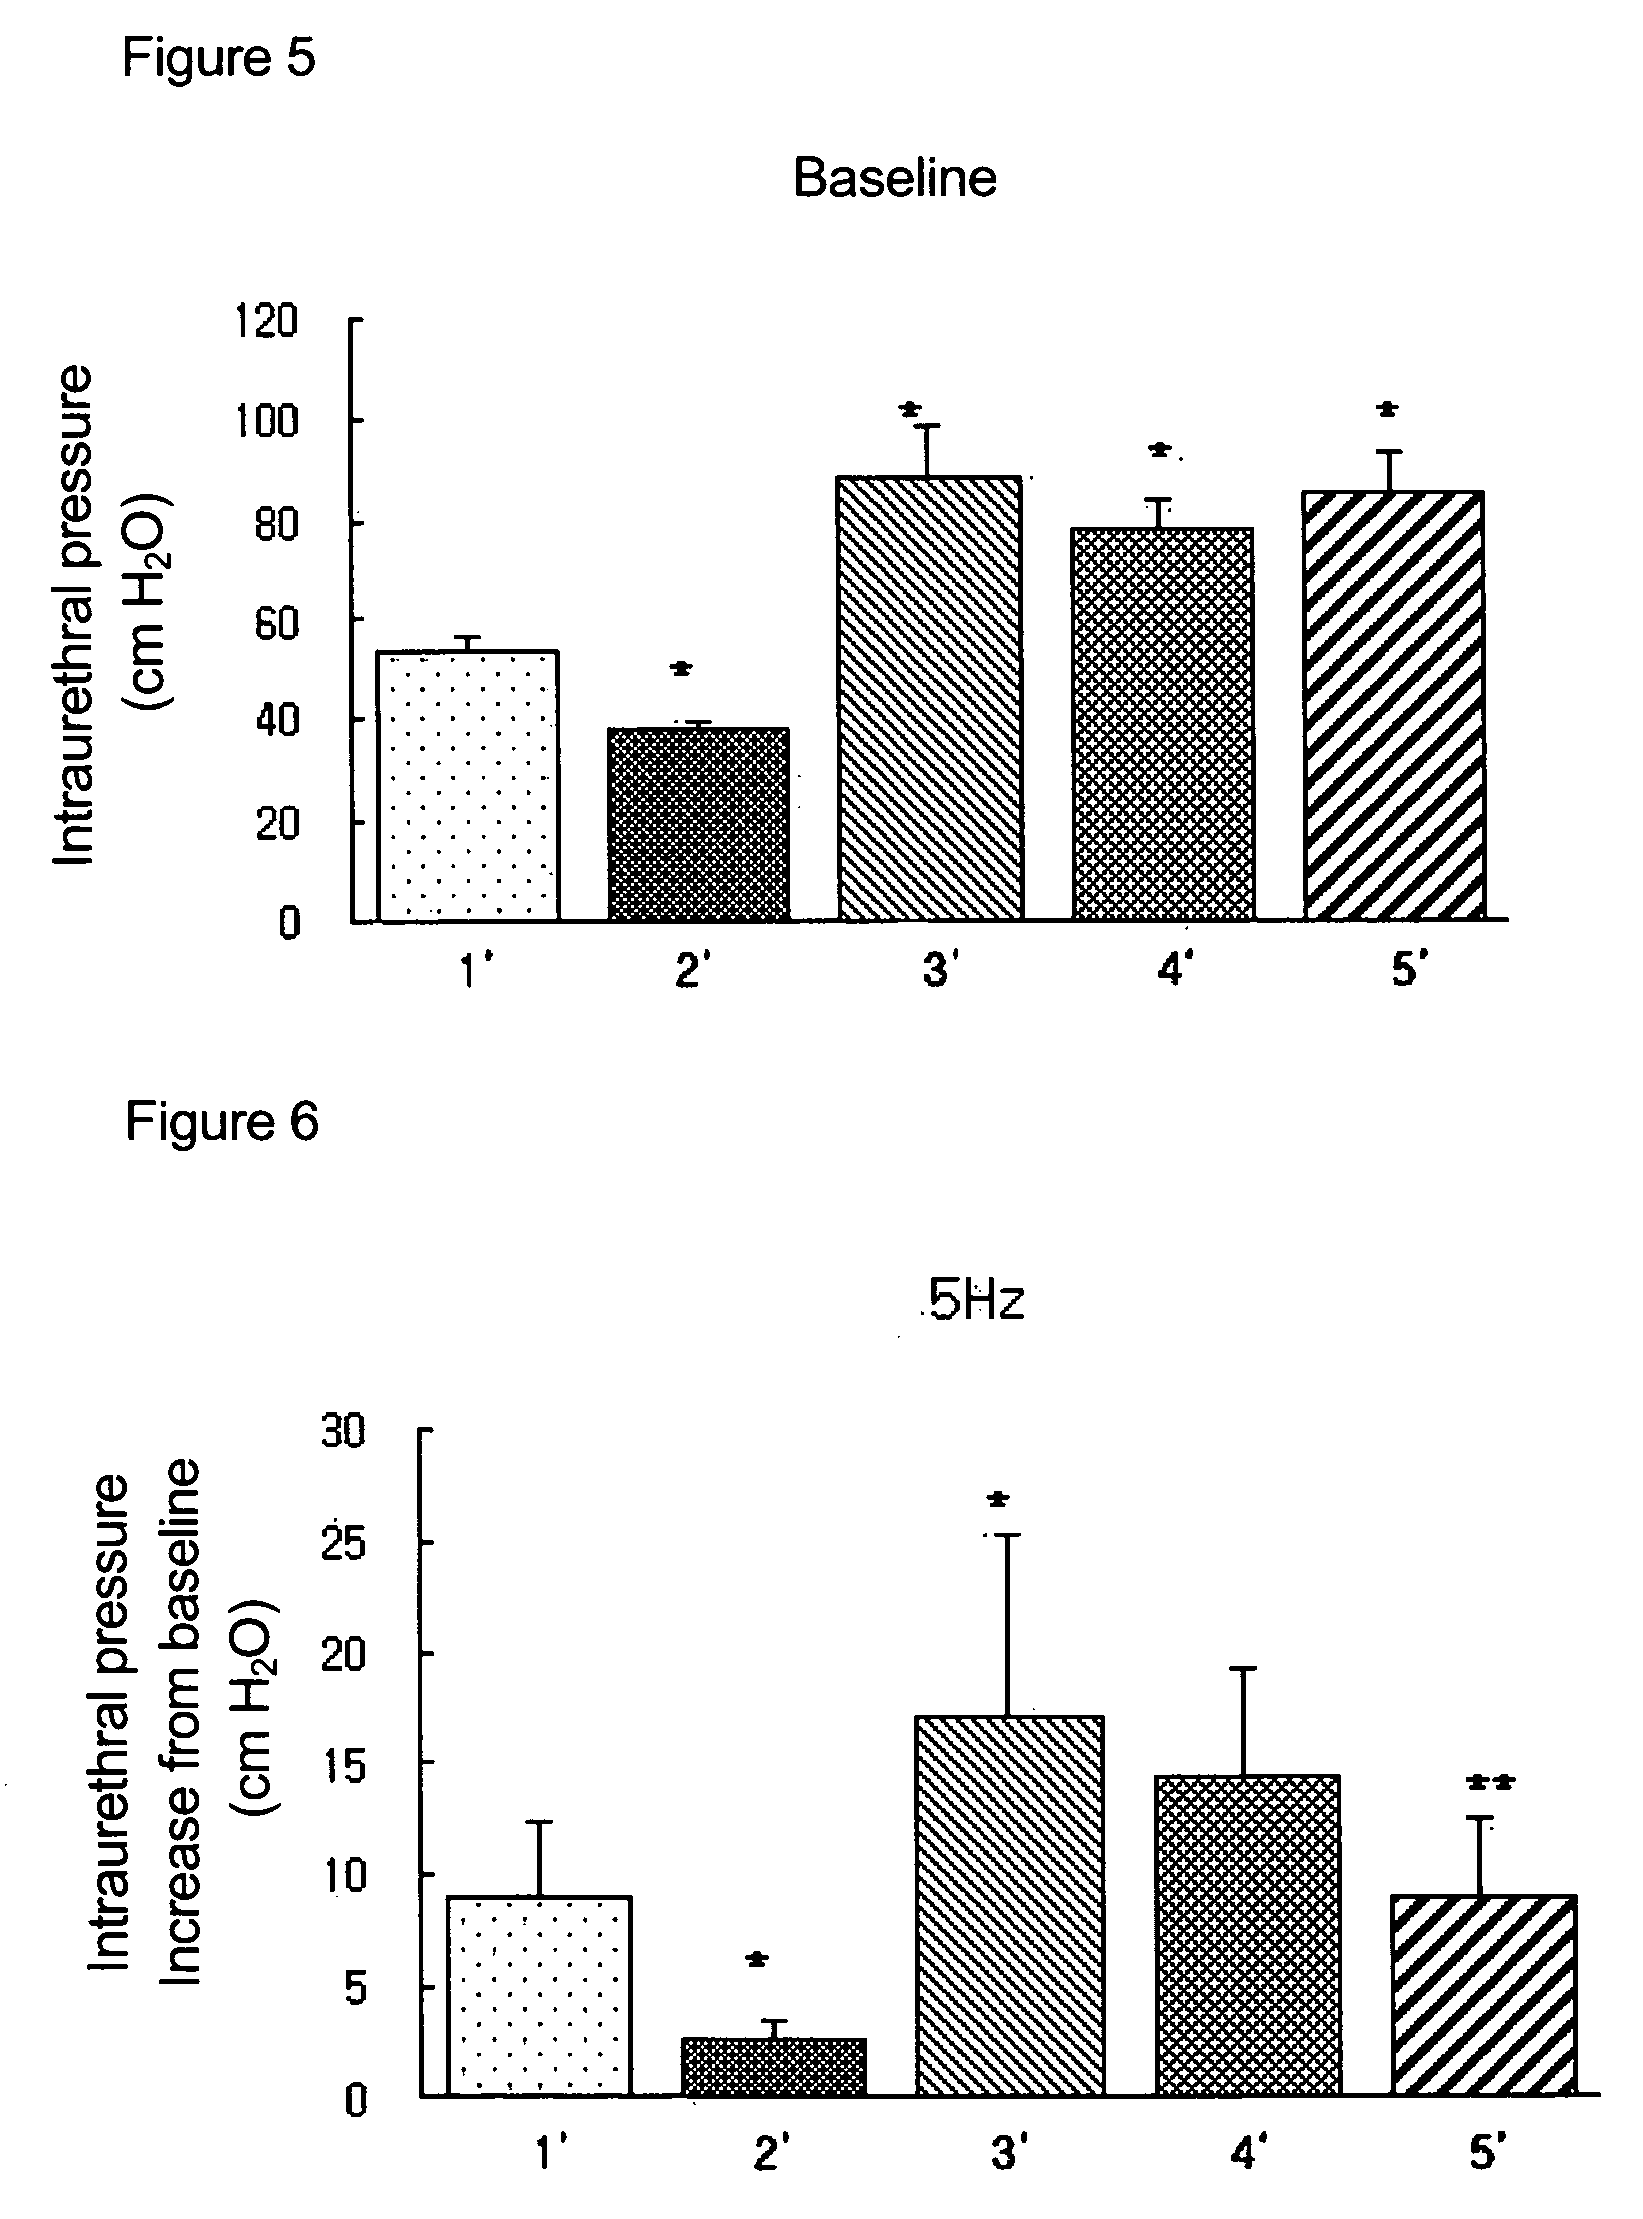 Agent for the prevention and treatment of prostatic hyperplasia comprising pyrazolopyrimidinone compound